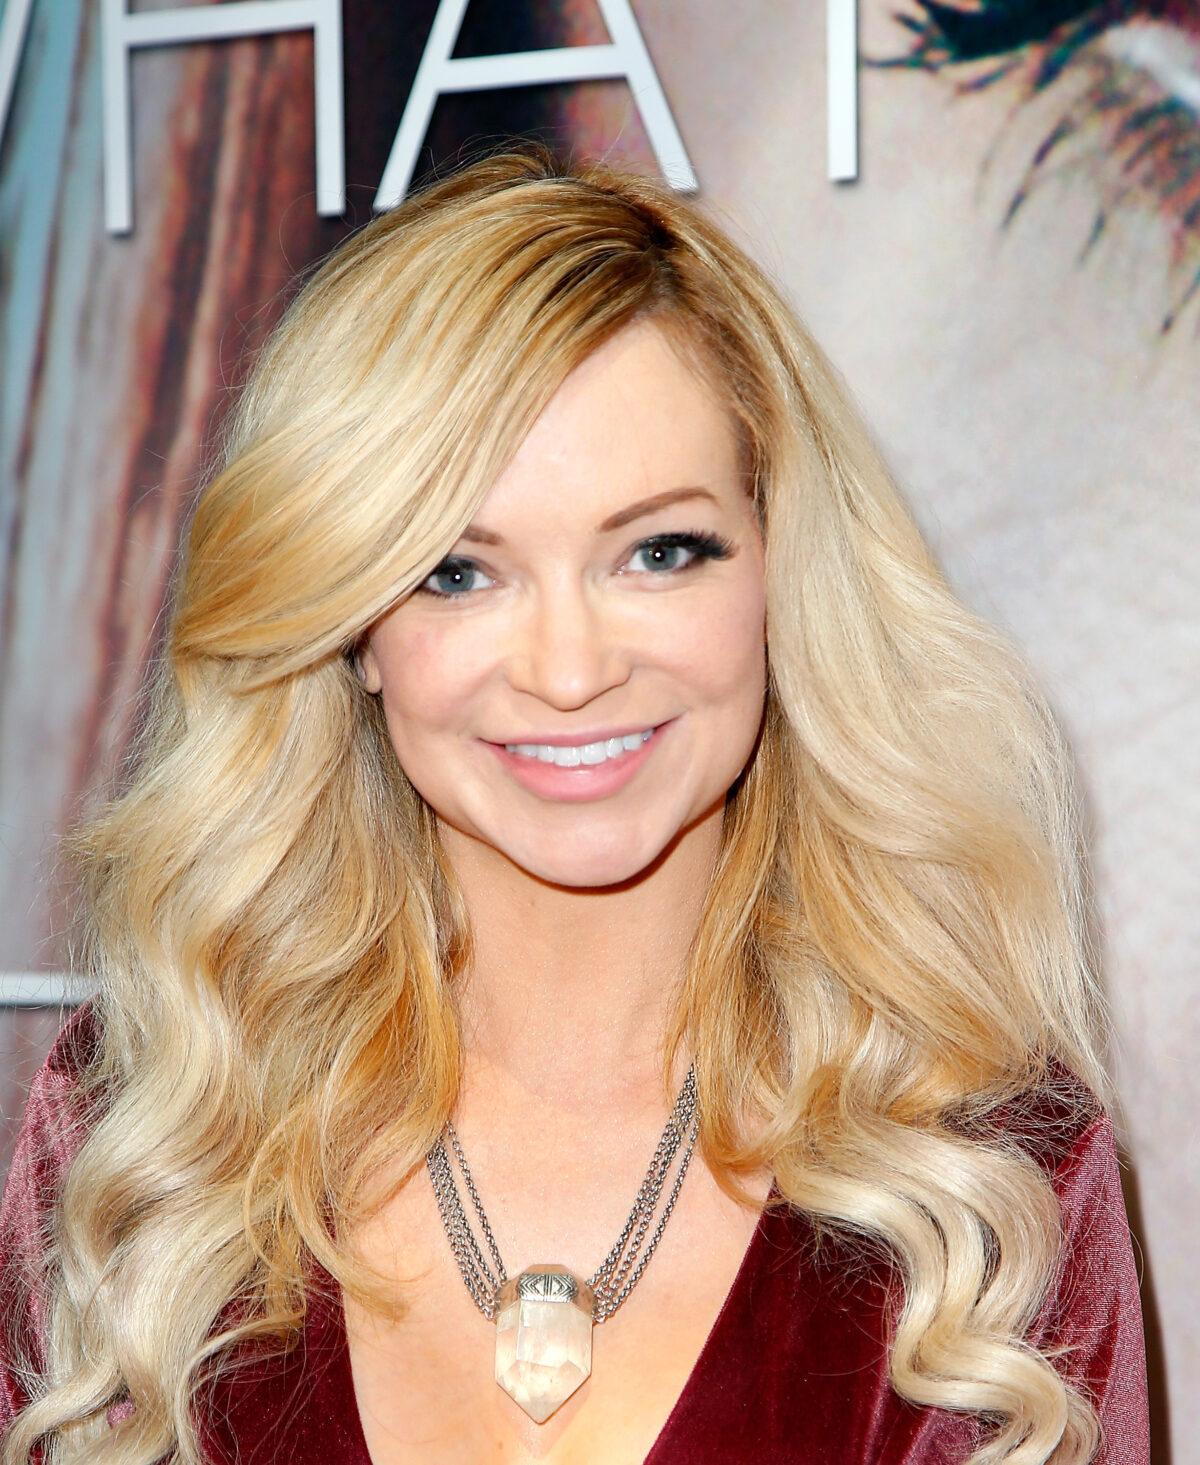 Mindy Robinson attends the "Unplanned" Red Carpet Premiere in Hollywood, Calif., on March 18, 2019. (Maury Phillips/Getty Images for Unplanned Movie, LLC)